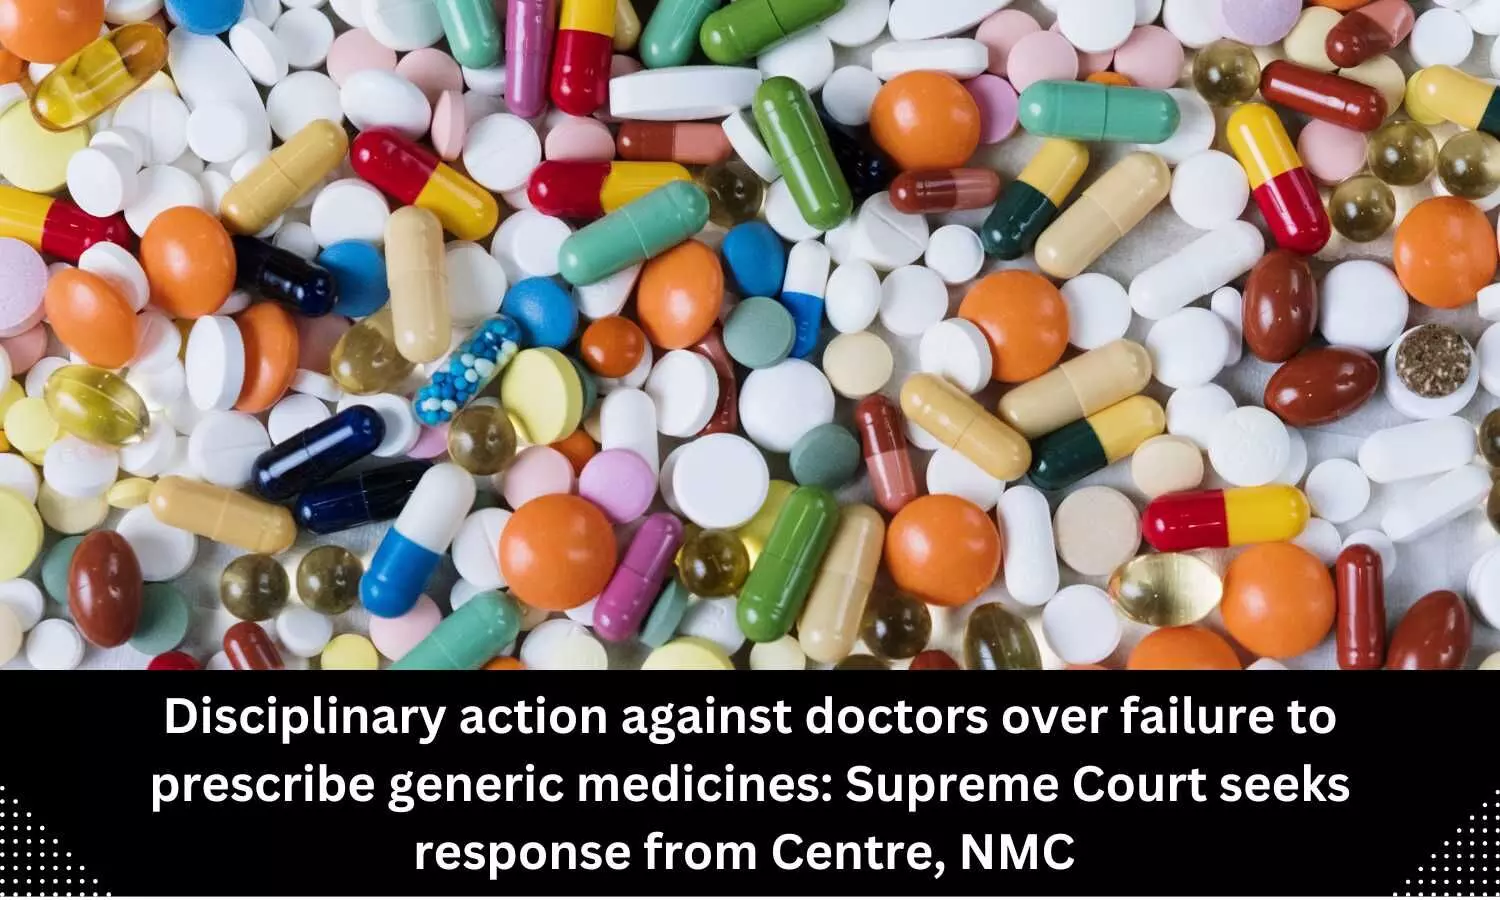 Disciplinary action against doctors over failure to prescribe generic medicines: SC seeks response from NMC, Centre